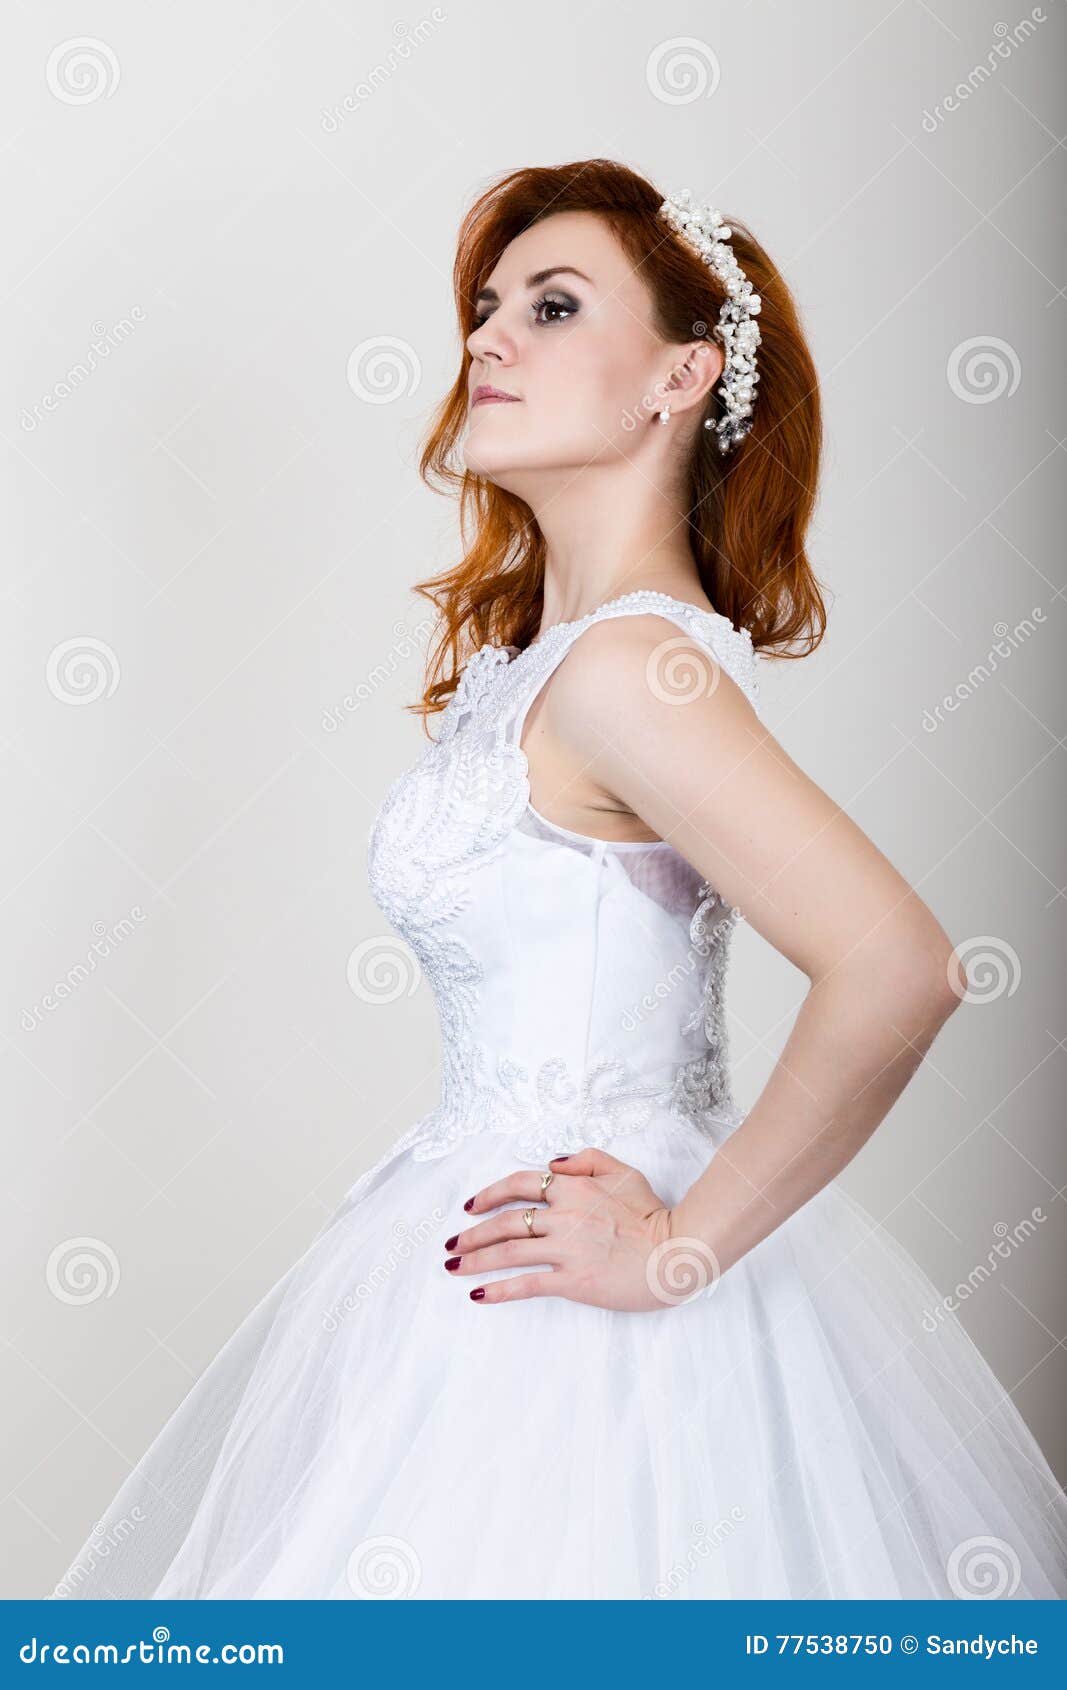 Red Haired Bride In A Wedding Dress Bright Unusual